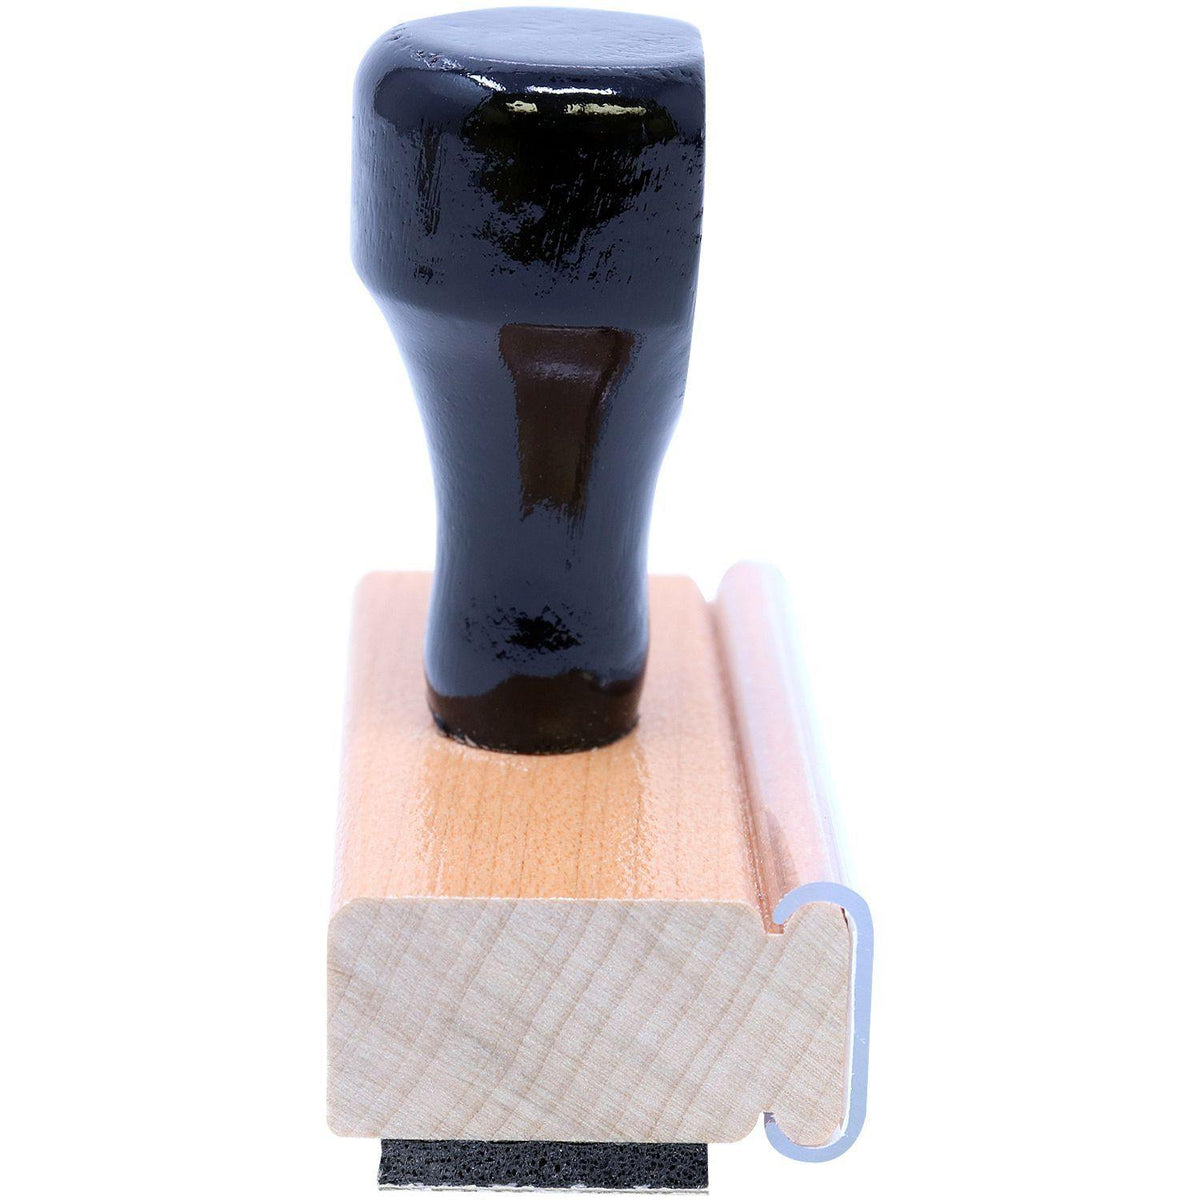 Large Smoker Rubber Stamp - Engineer Seal Stamps - Brand_Acorn, Impression Size_Large, Stamp Type_Regular Stamp, Type of Use_Medical Office